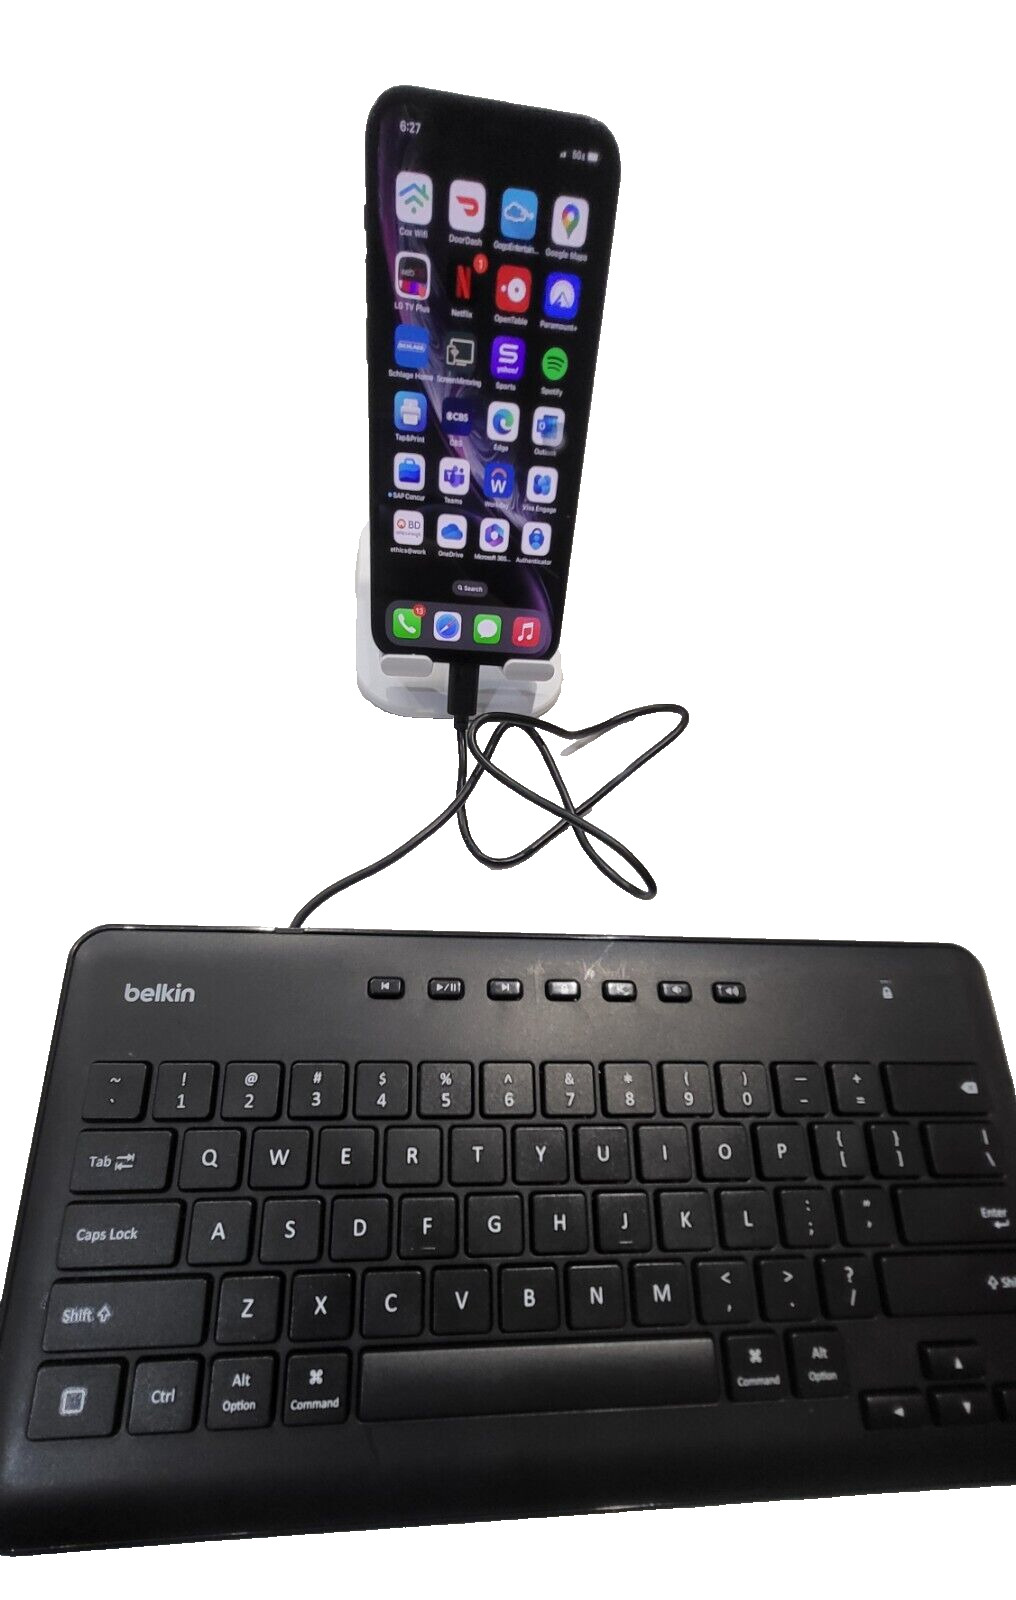 Belkin Wired Keyboard For Apple iPad With Lightning Cable - Works w/ Apple iPad,